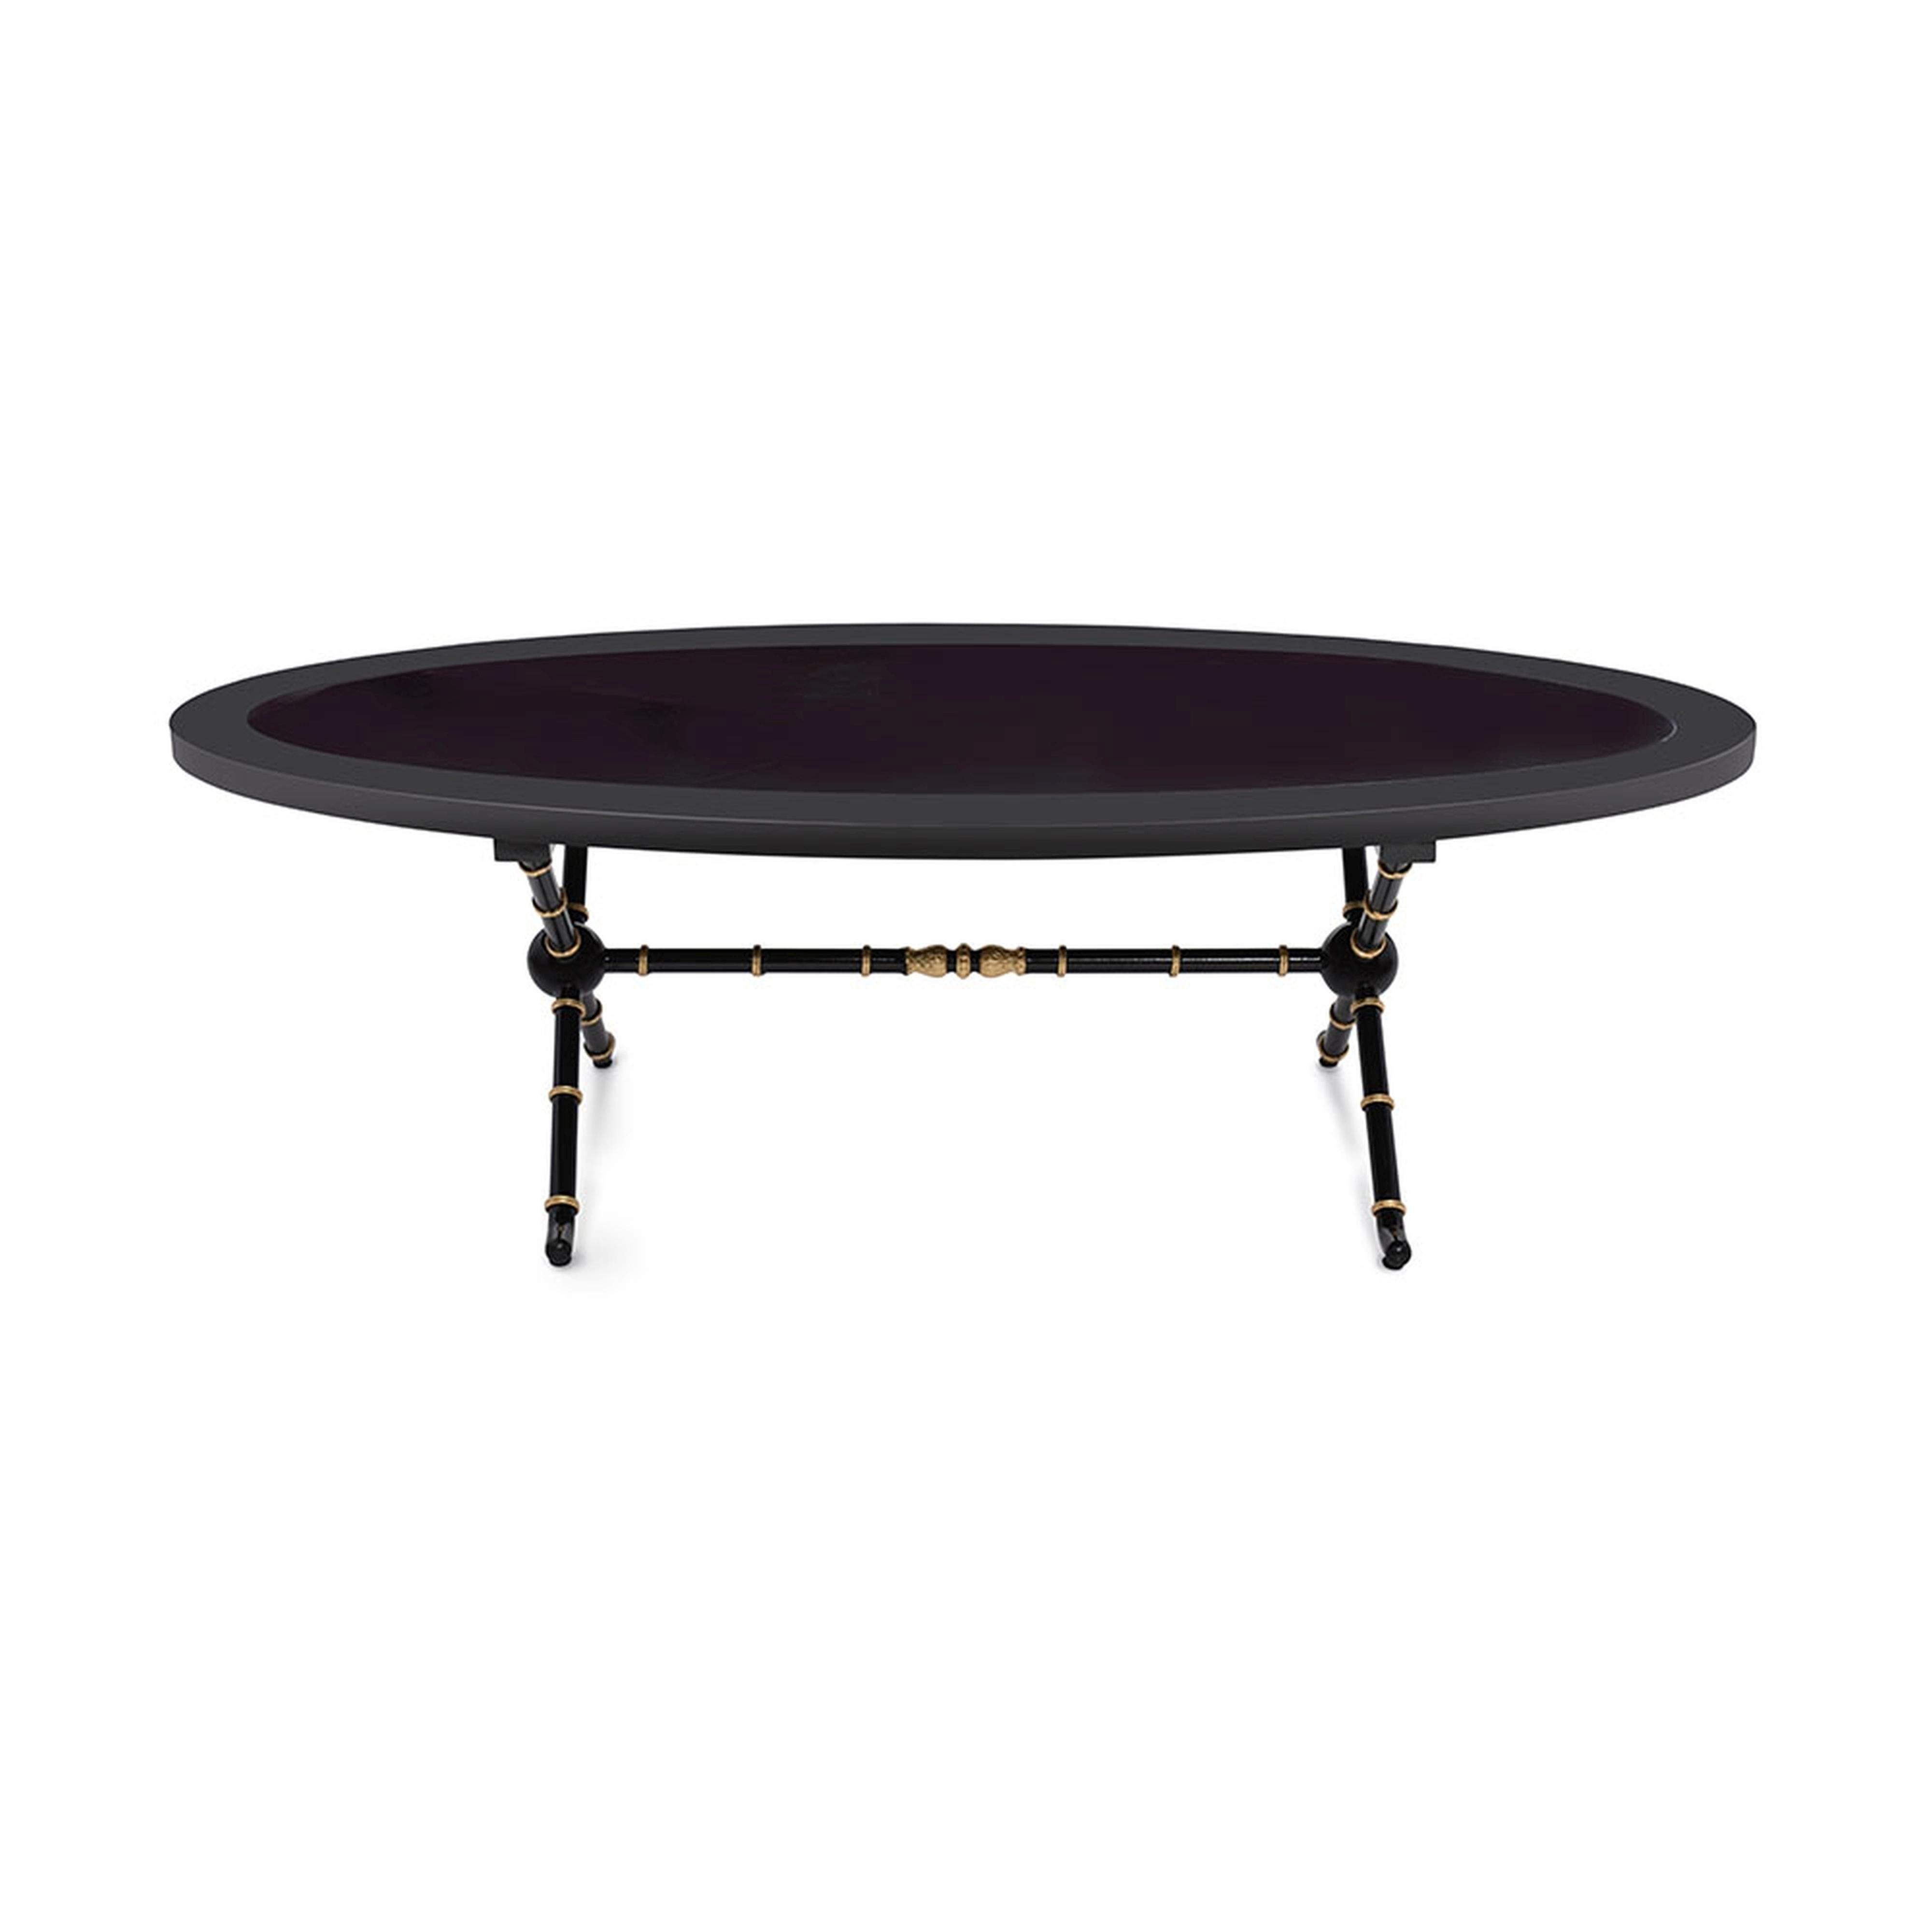 The Marmont coffee table is sophisticated as it is substantial. The distinctive, oval-shaped top is solemn and stabile, while the base offers a delicate bamboo effect in a hand-gilded leaf trim. Inlaid black tempered glass top. An aesthetically